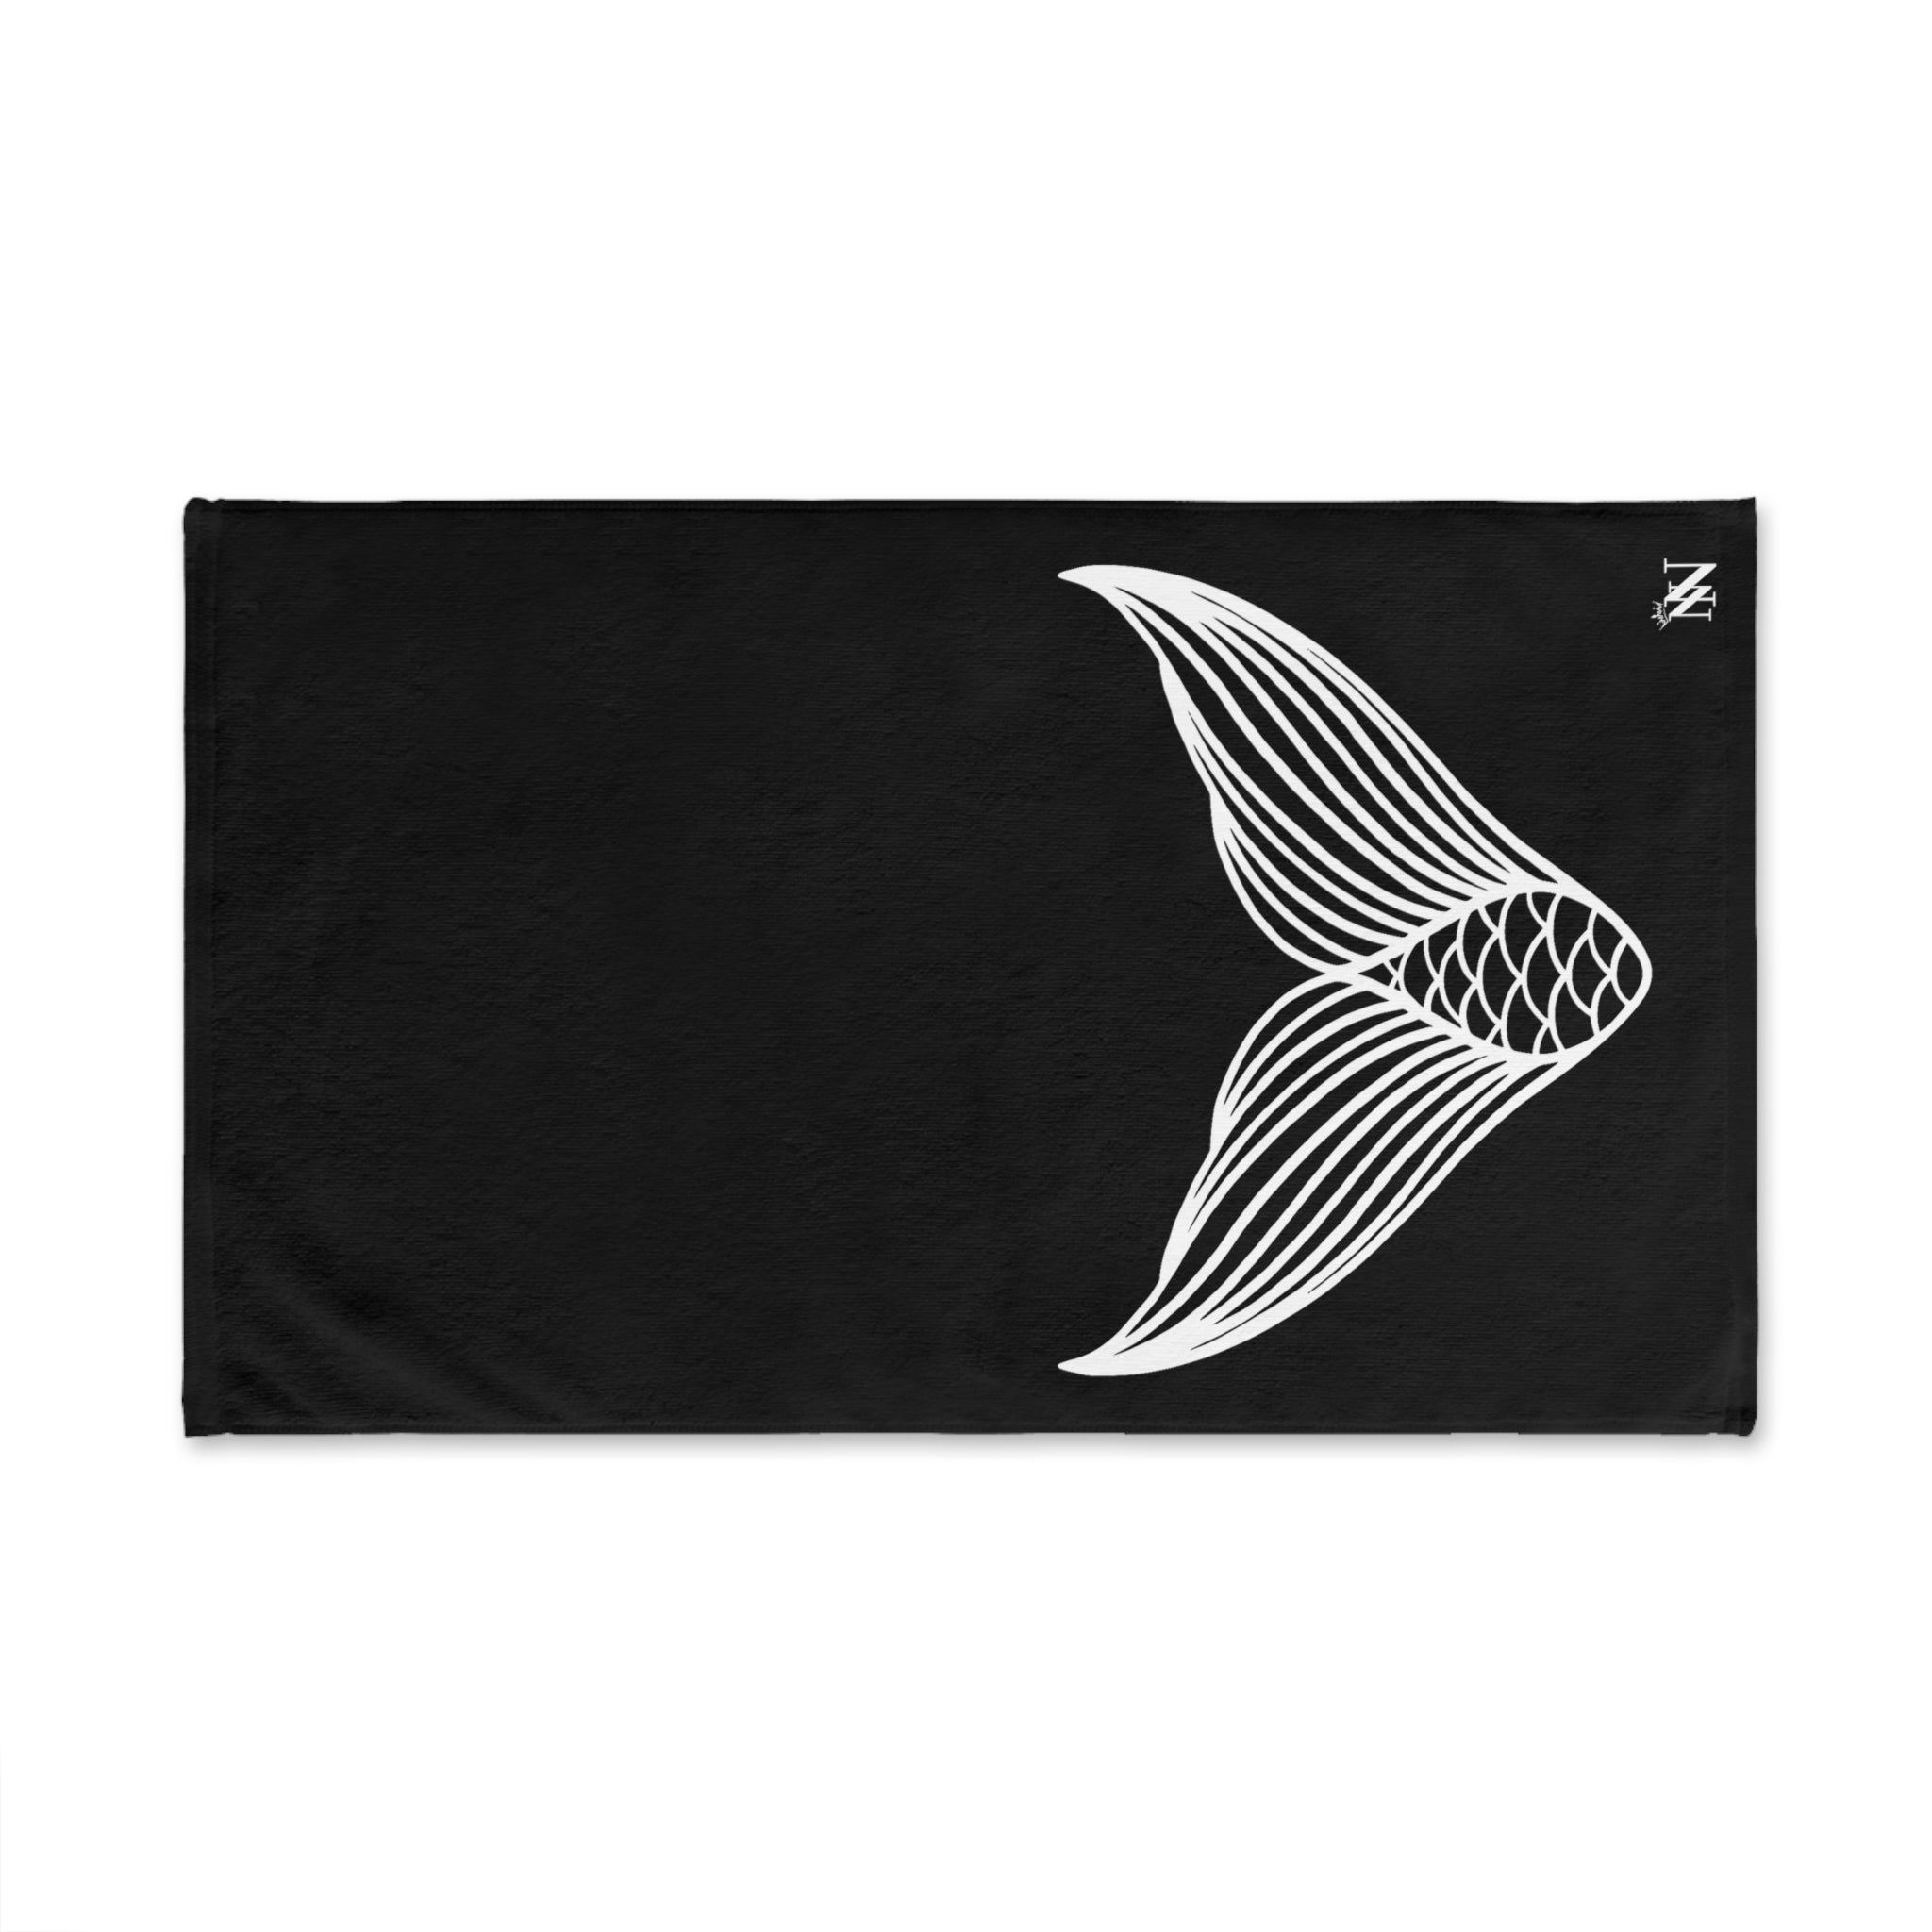 Tale Mermaid TailBlack | Sexy Gifts for Boyfriend, Funny Towel Romantic Gift for Wedding Couple Fiance First Year 2nd Anniversary Valentines, Party Gag Gifts, Joke Humor Cloth for Husband Men BF NECTAR NAPKINS